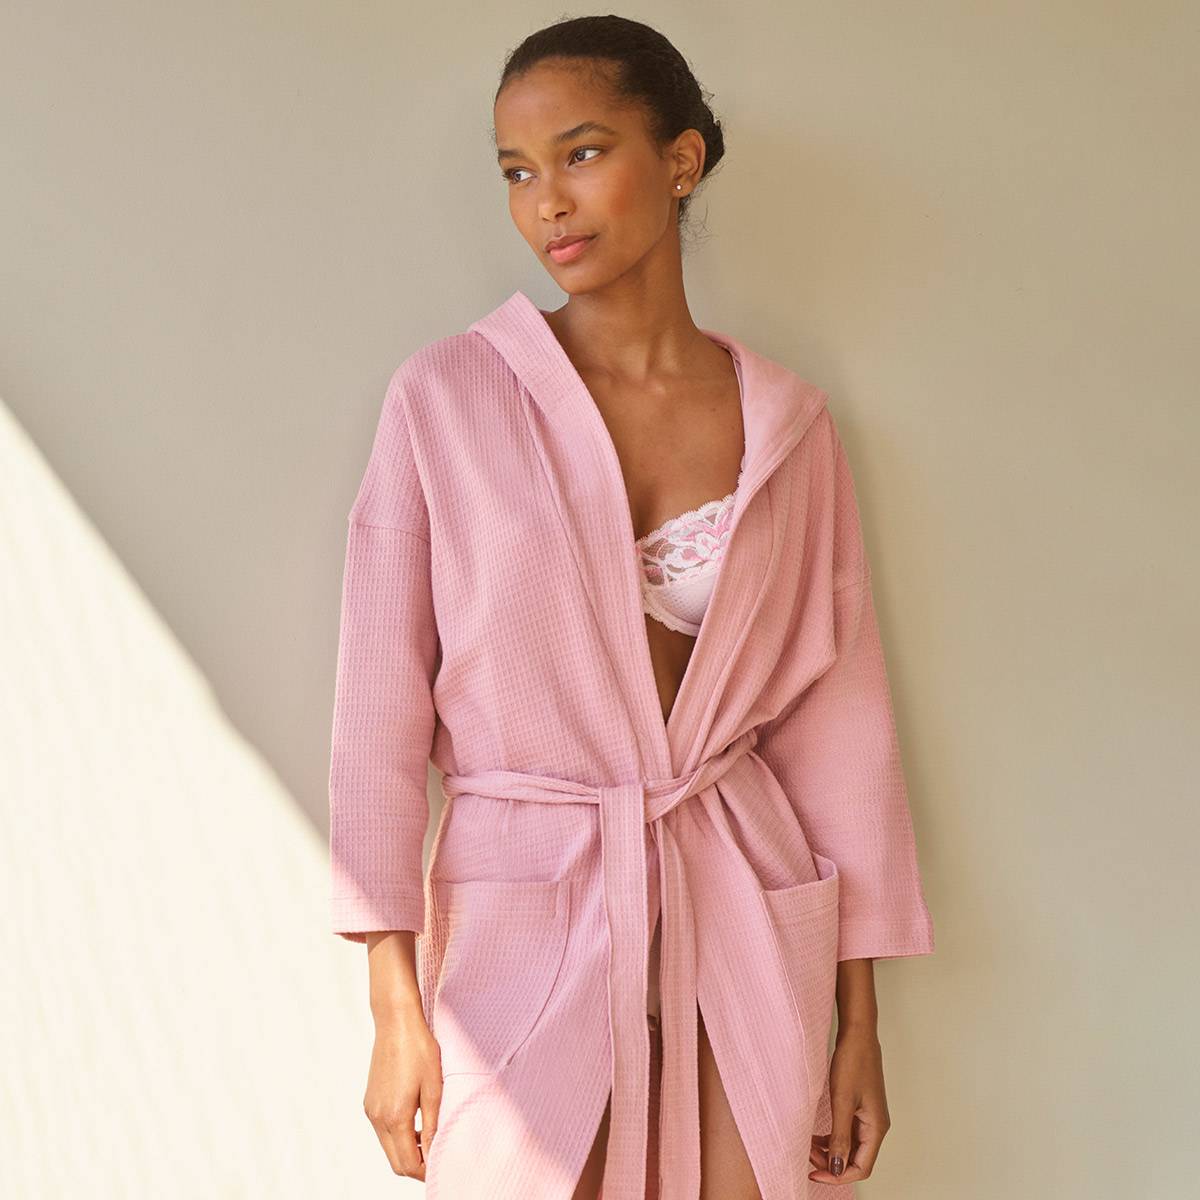 Woman wearing pink waffle-pattern dressing gown. Dressing gowns